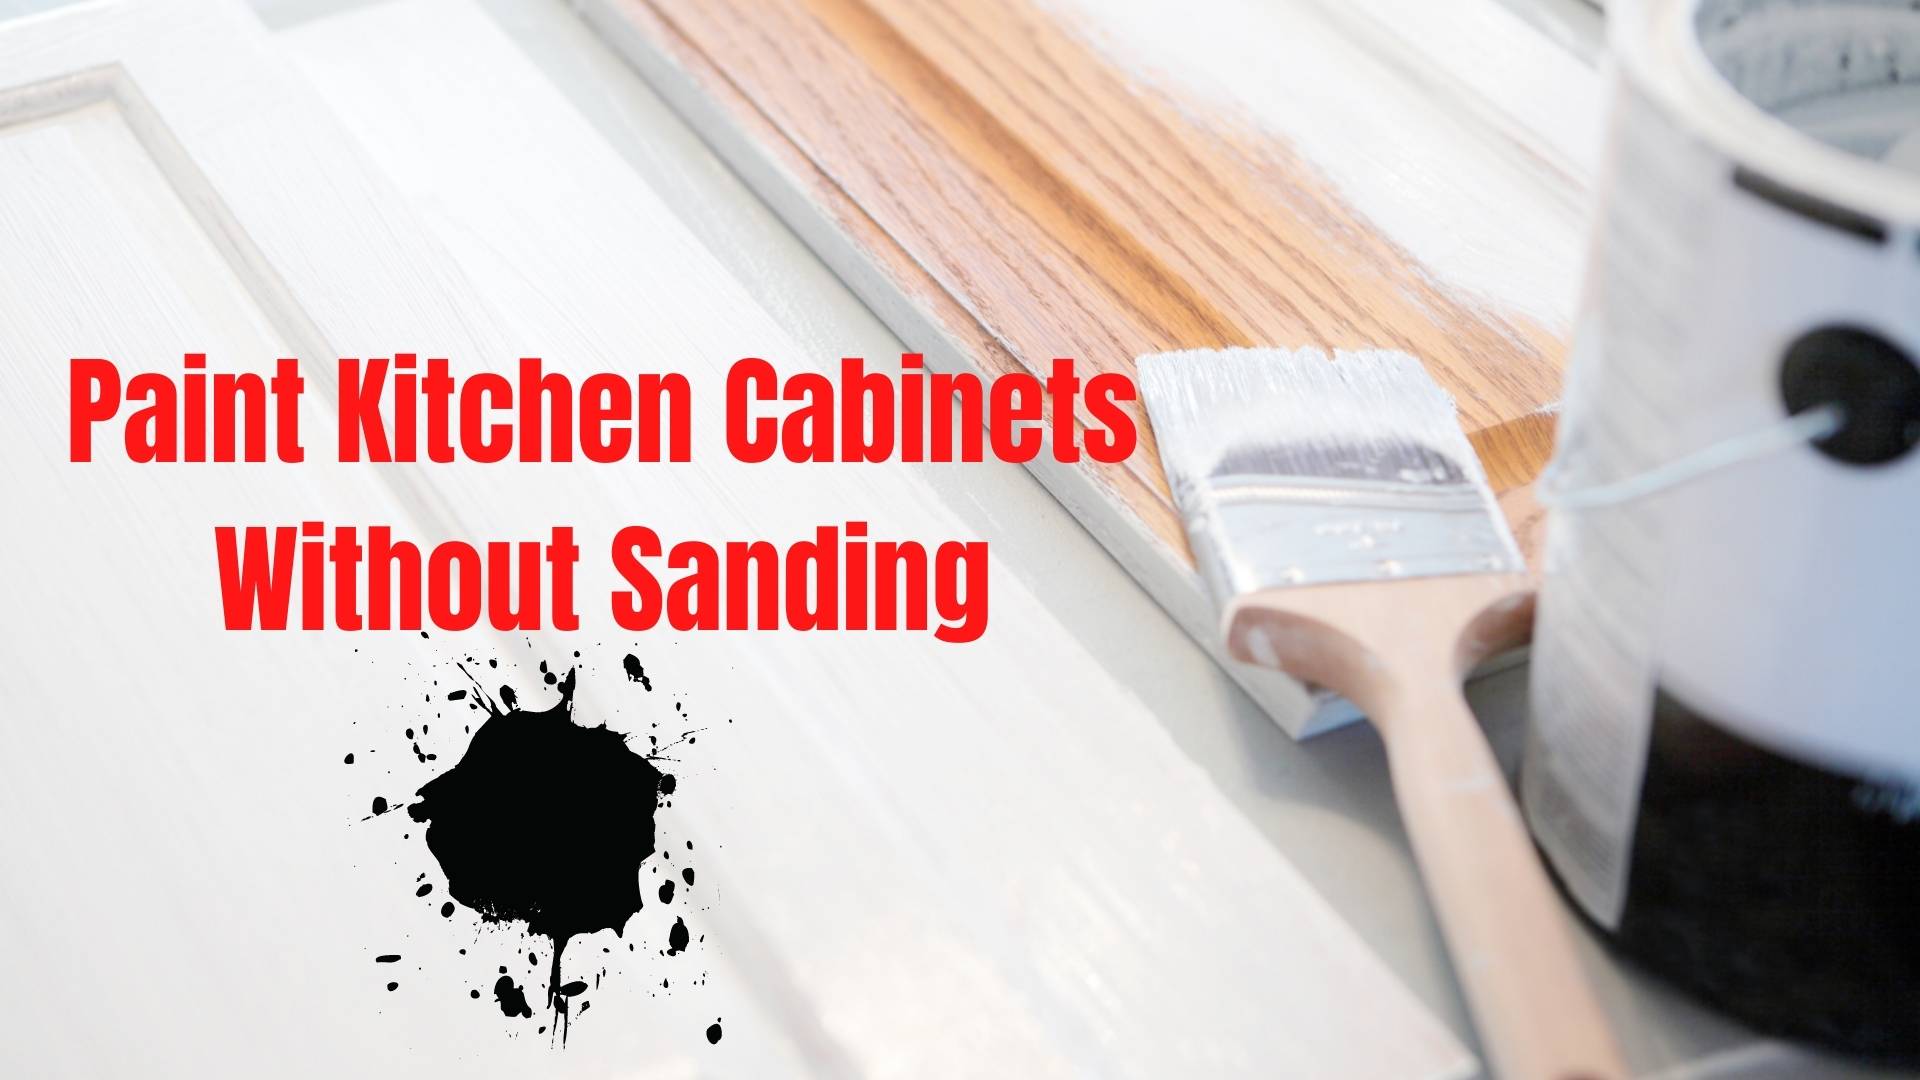 How To Paint Kitchen Cabinets Without Sanding In 2021